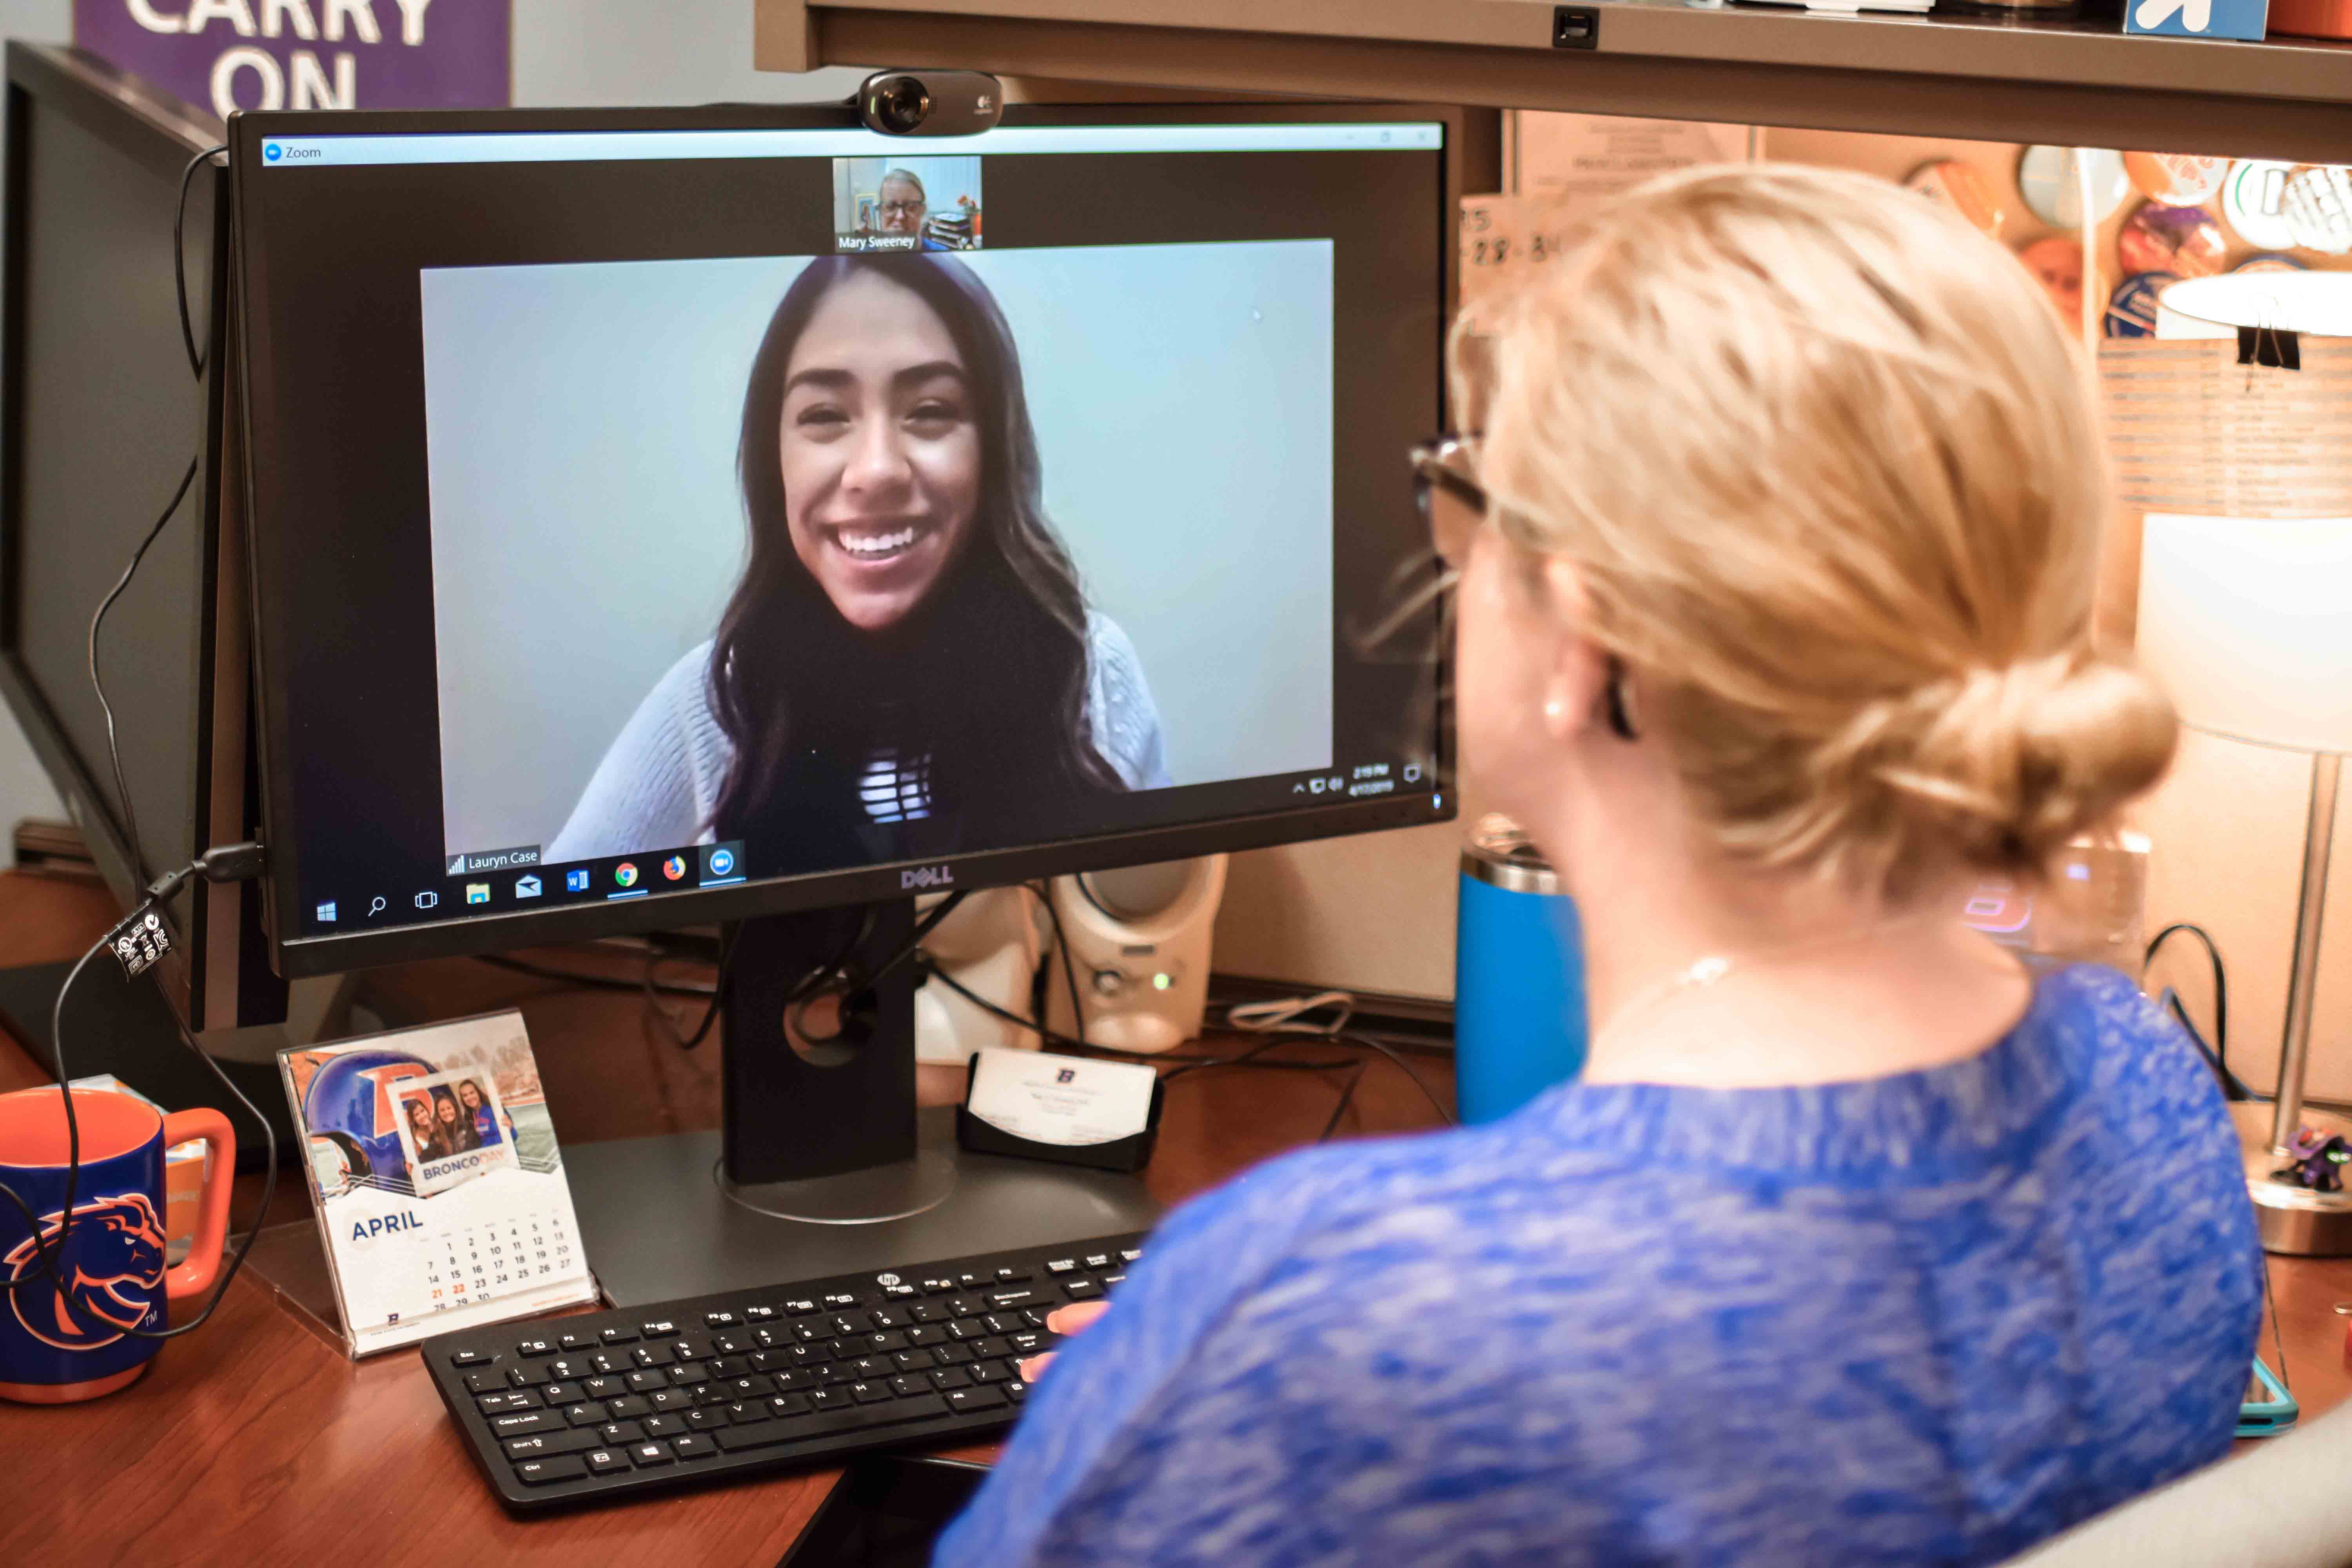 Counselor talking to student via video on a computer monitor